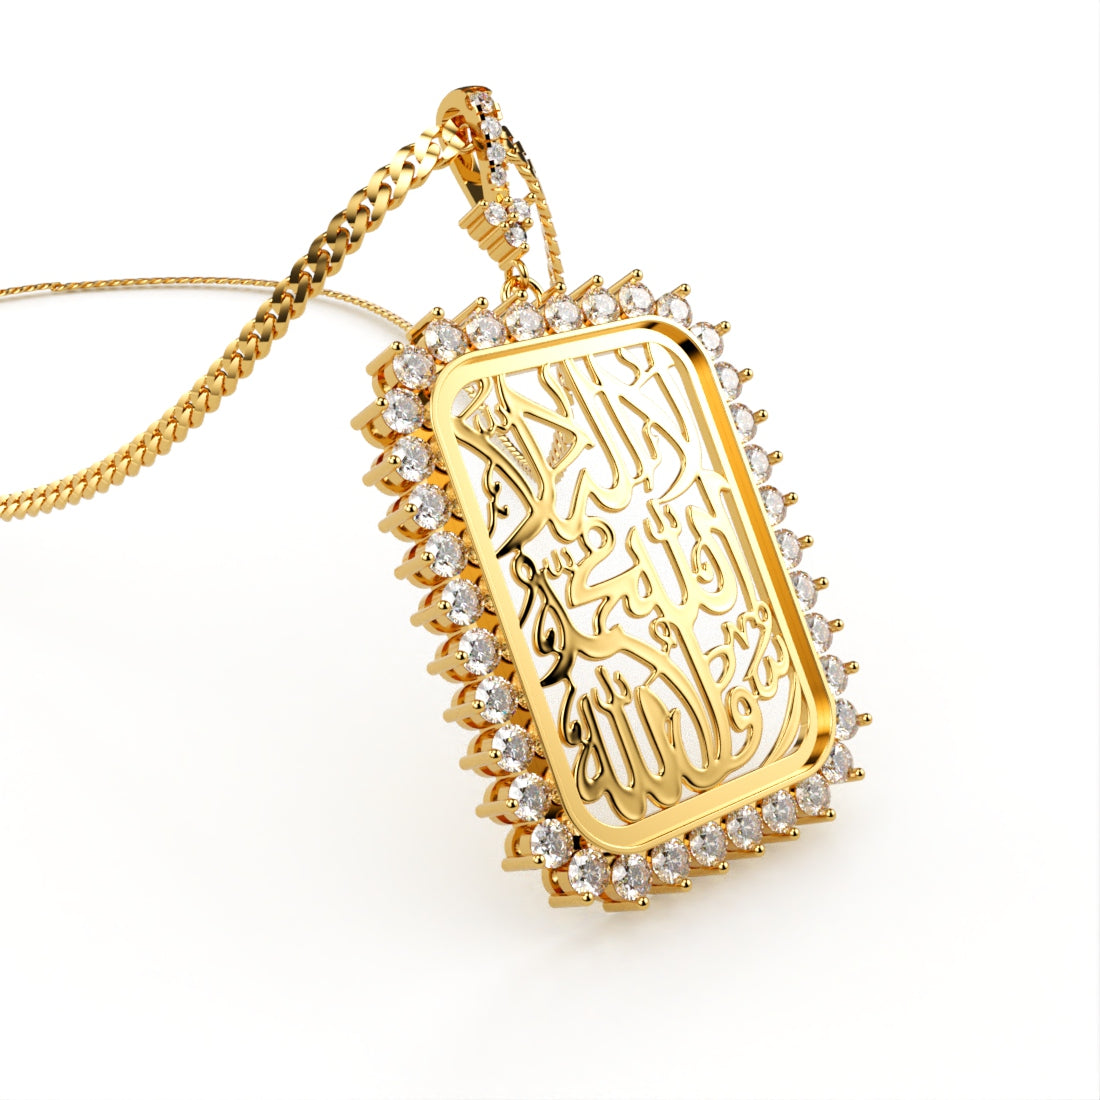 The Kalma Locket (Gold Plated 925 Sterling Silver)